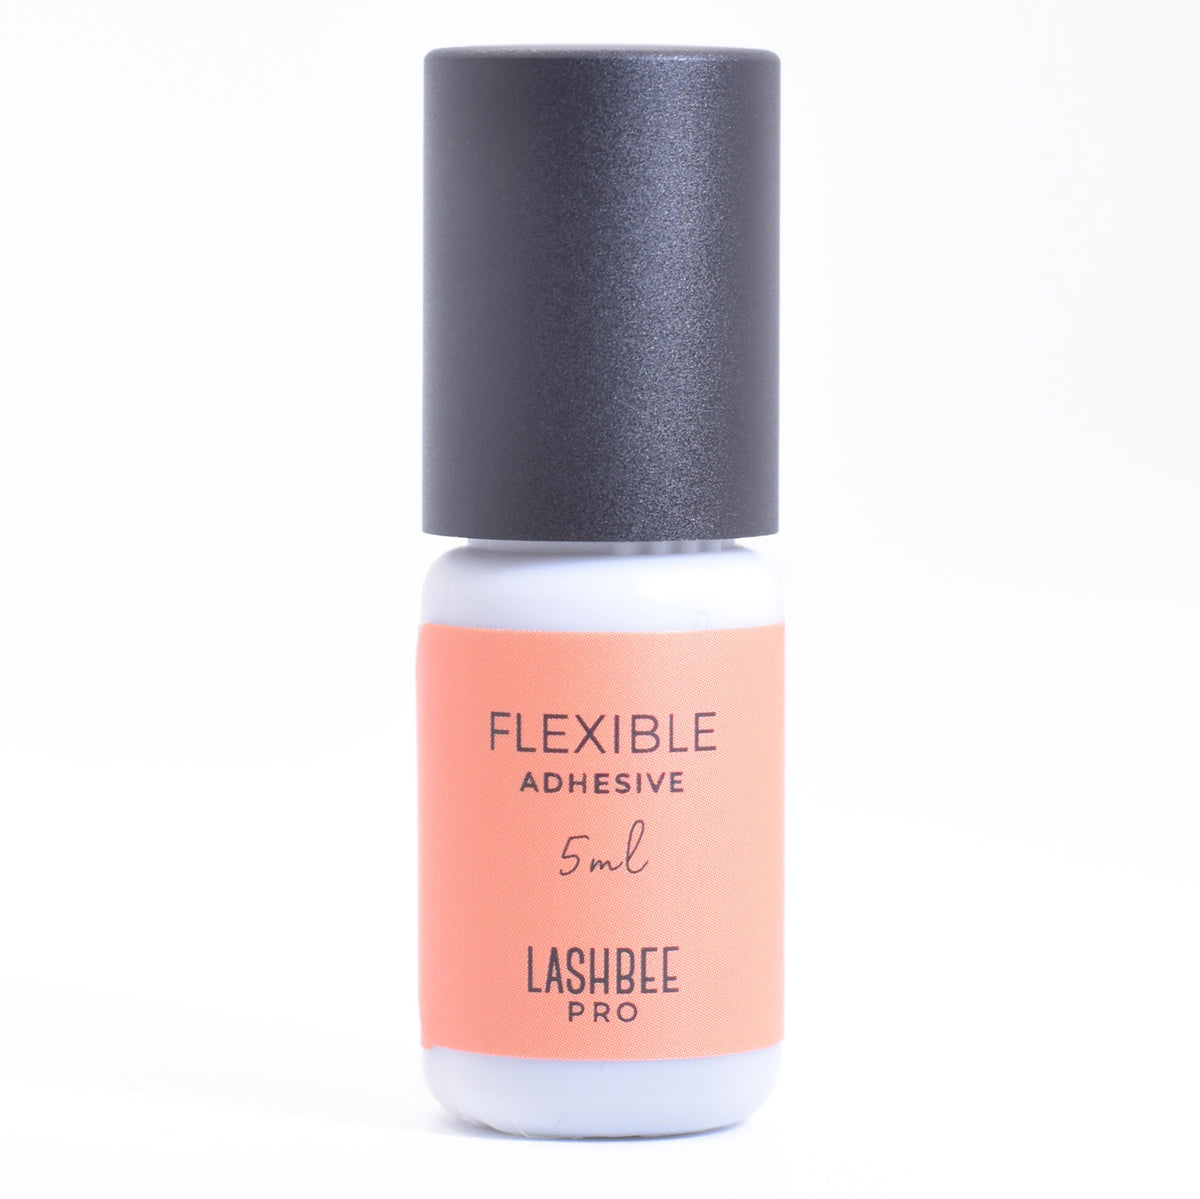 LashBeePro Flexible Adhesive for training in eyelash extensions - front of the orange bottle with black cap